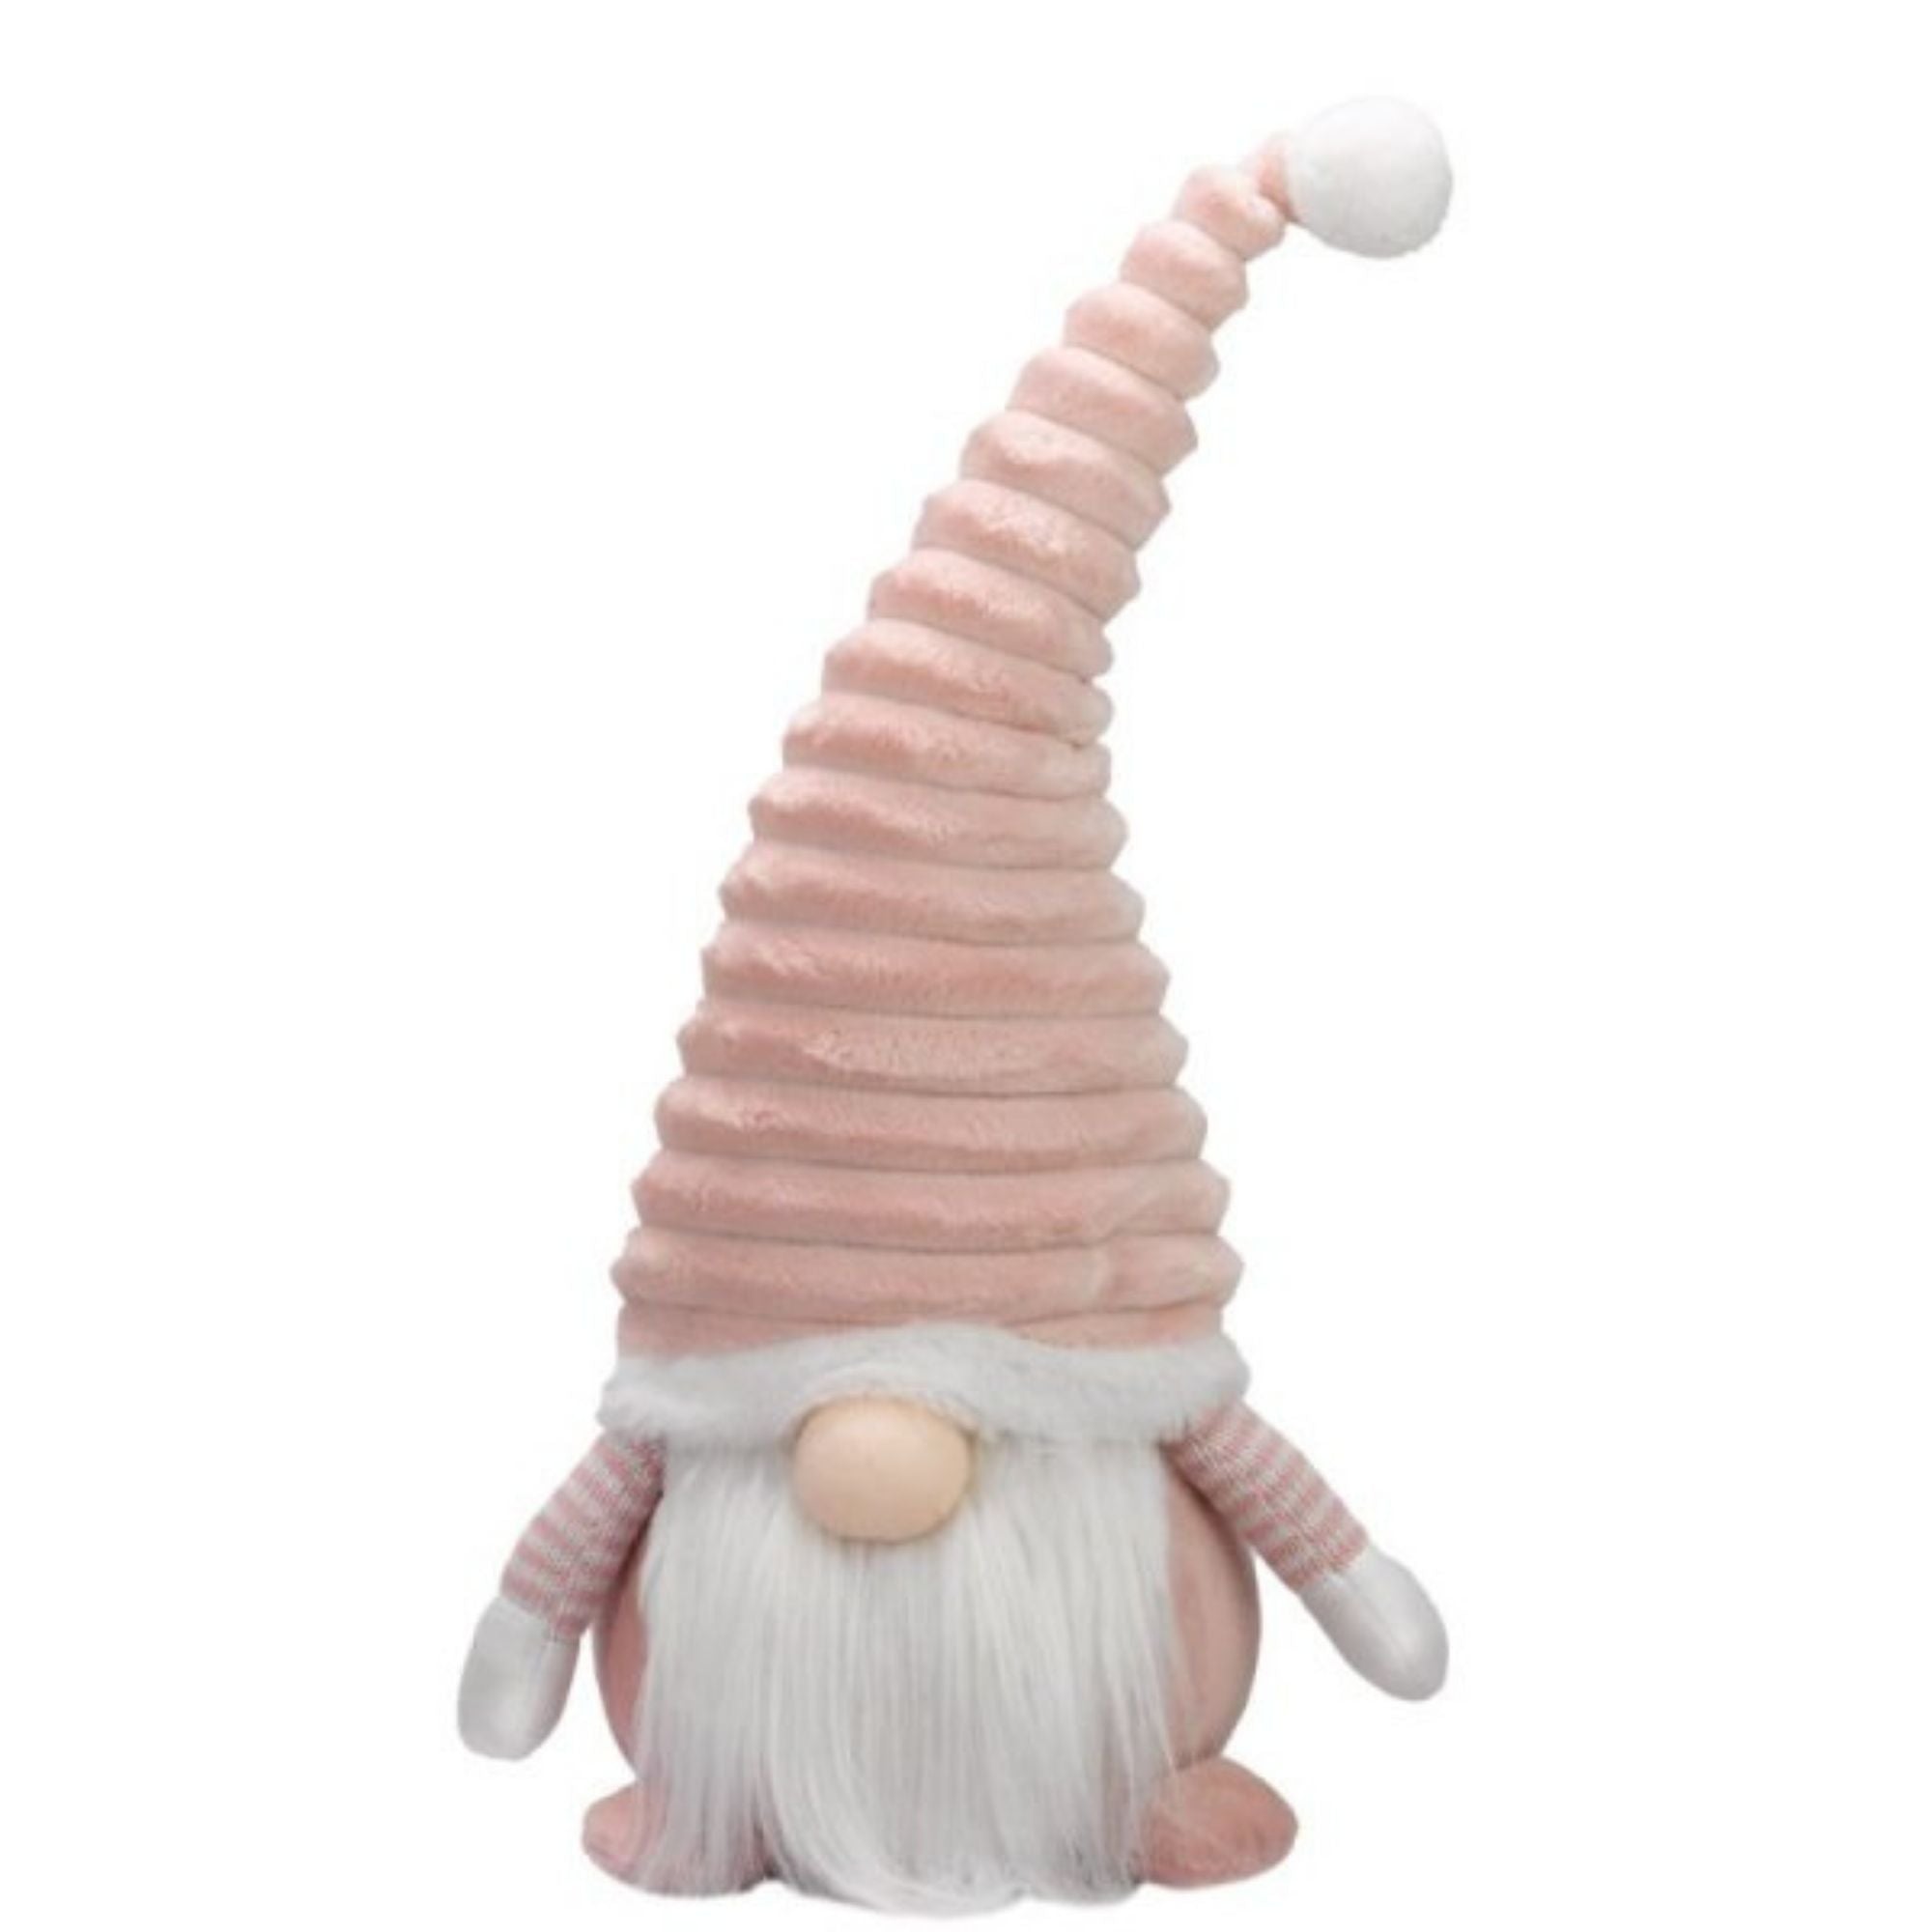 51cm Large Sitting Plush Christmas Gonk with Grooved Hat in Pink